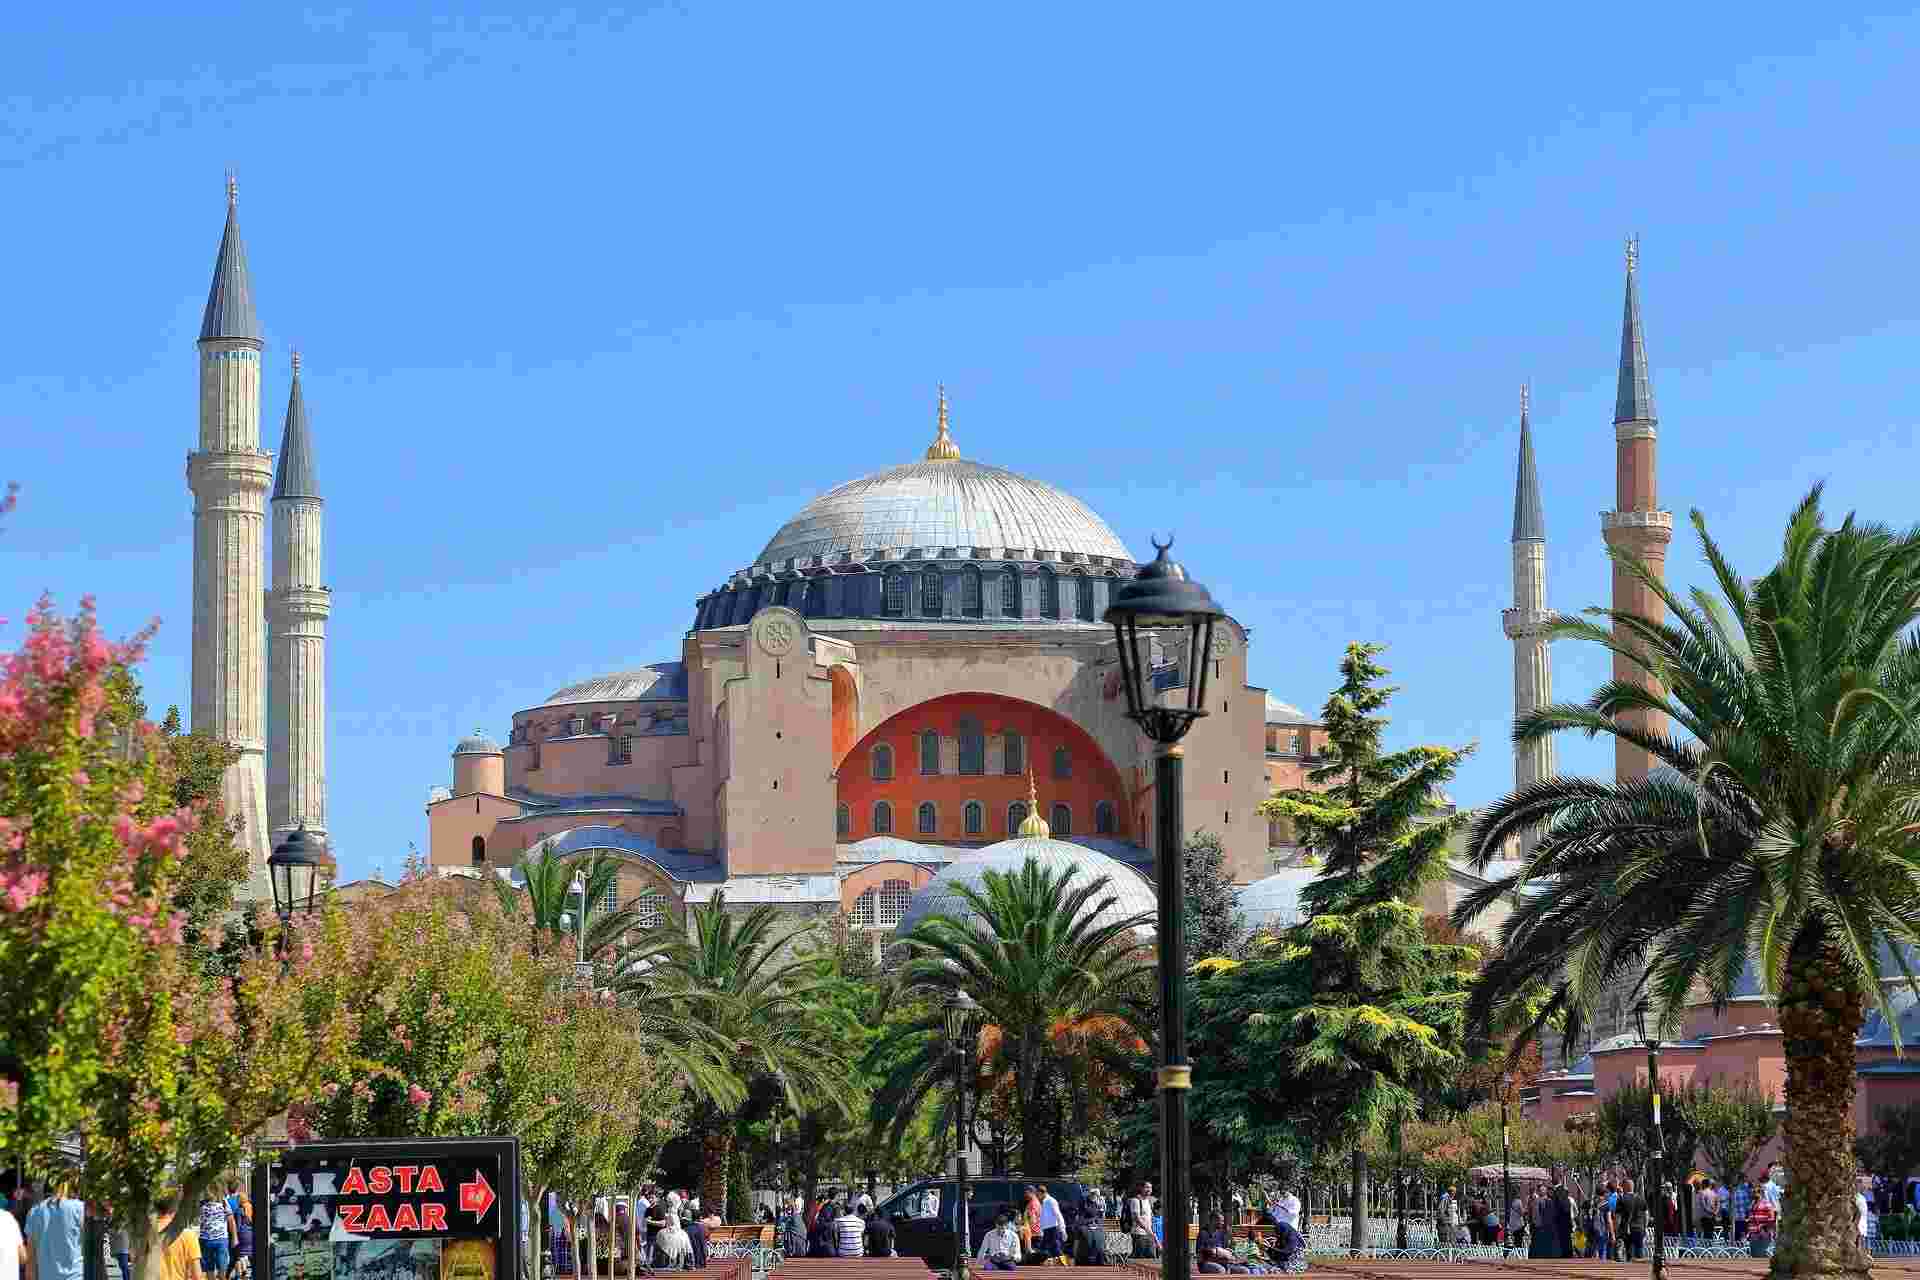 Hagia Sophia located in Istanbul is amongst the most famous structures in Turkey.